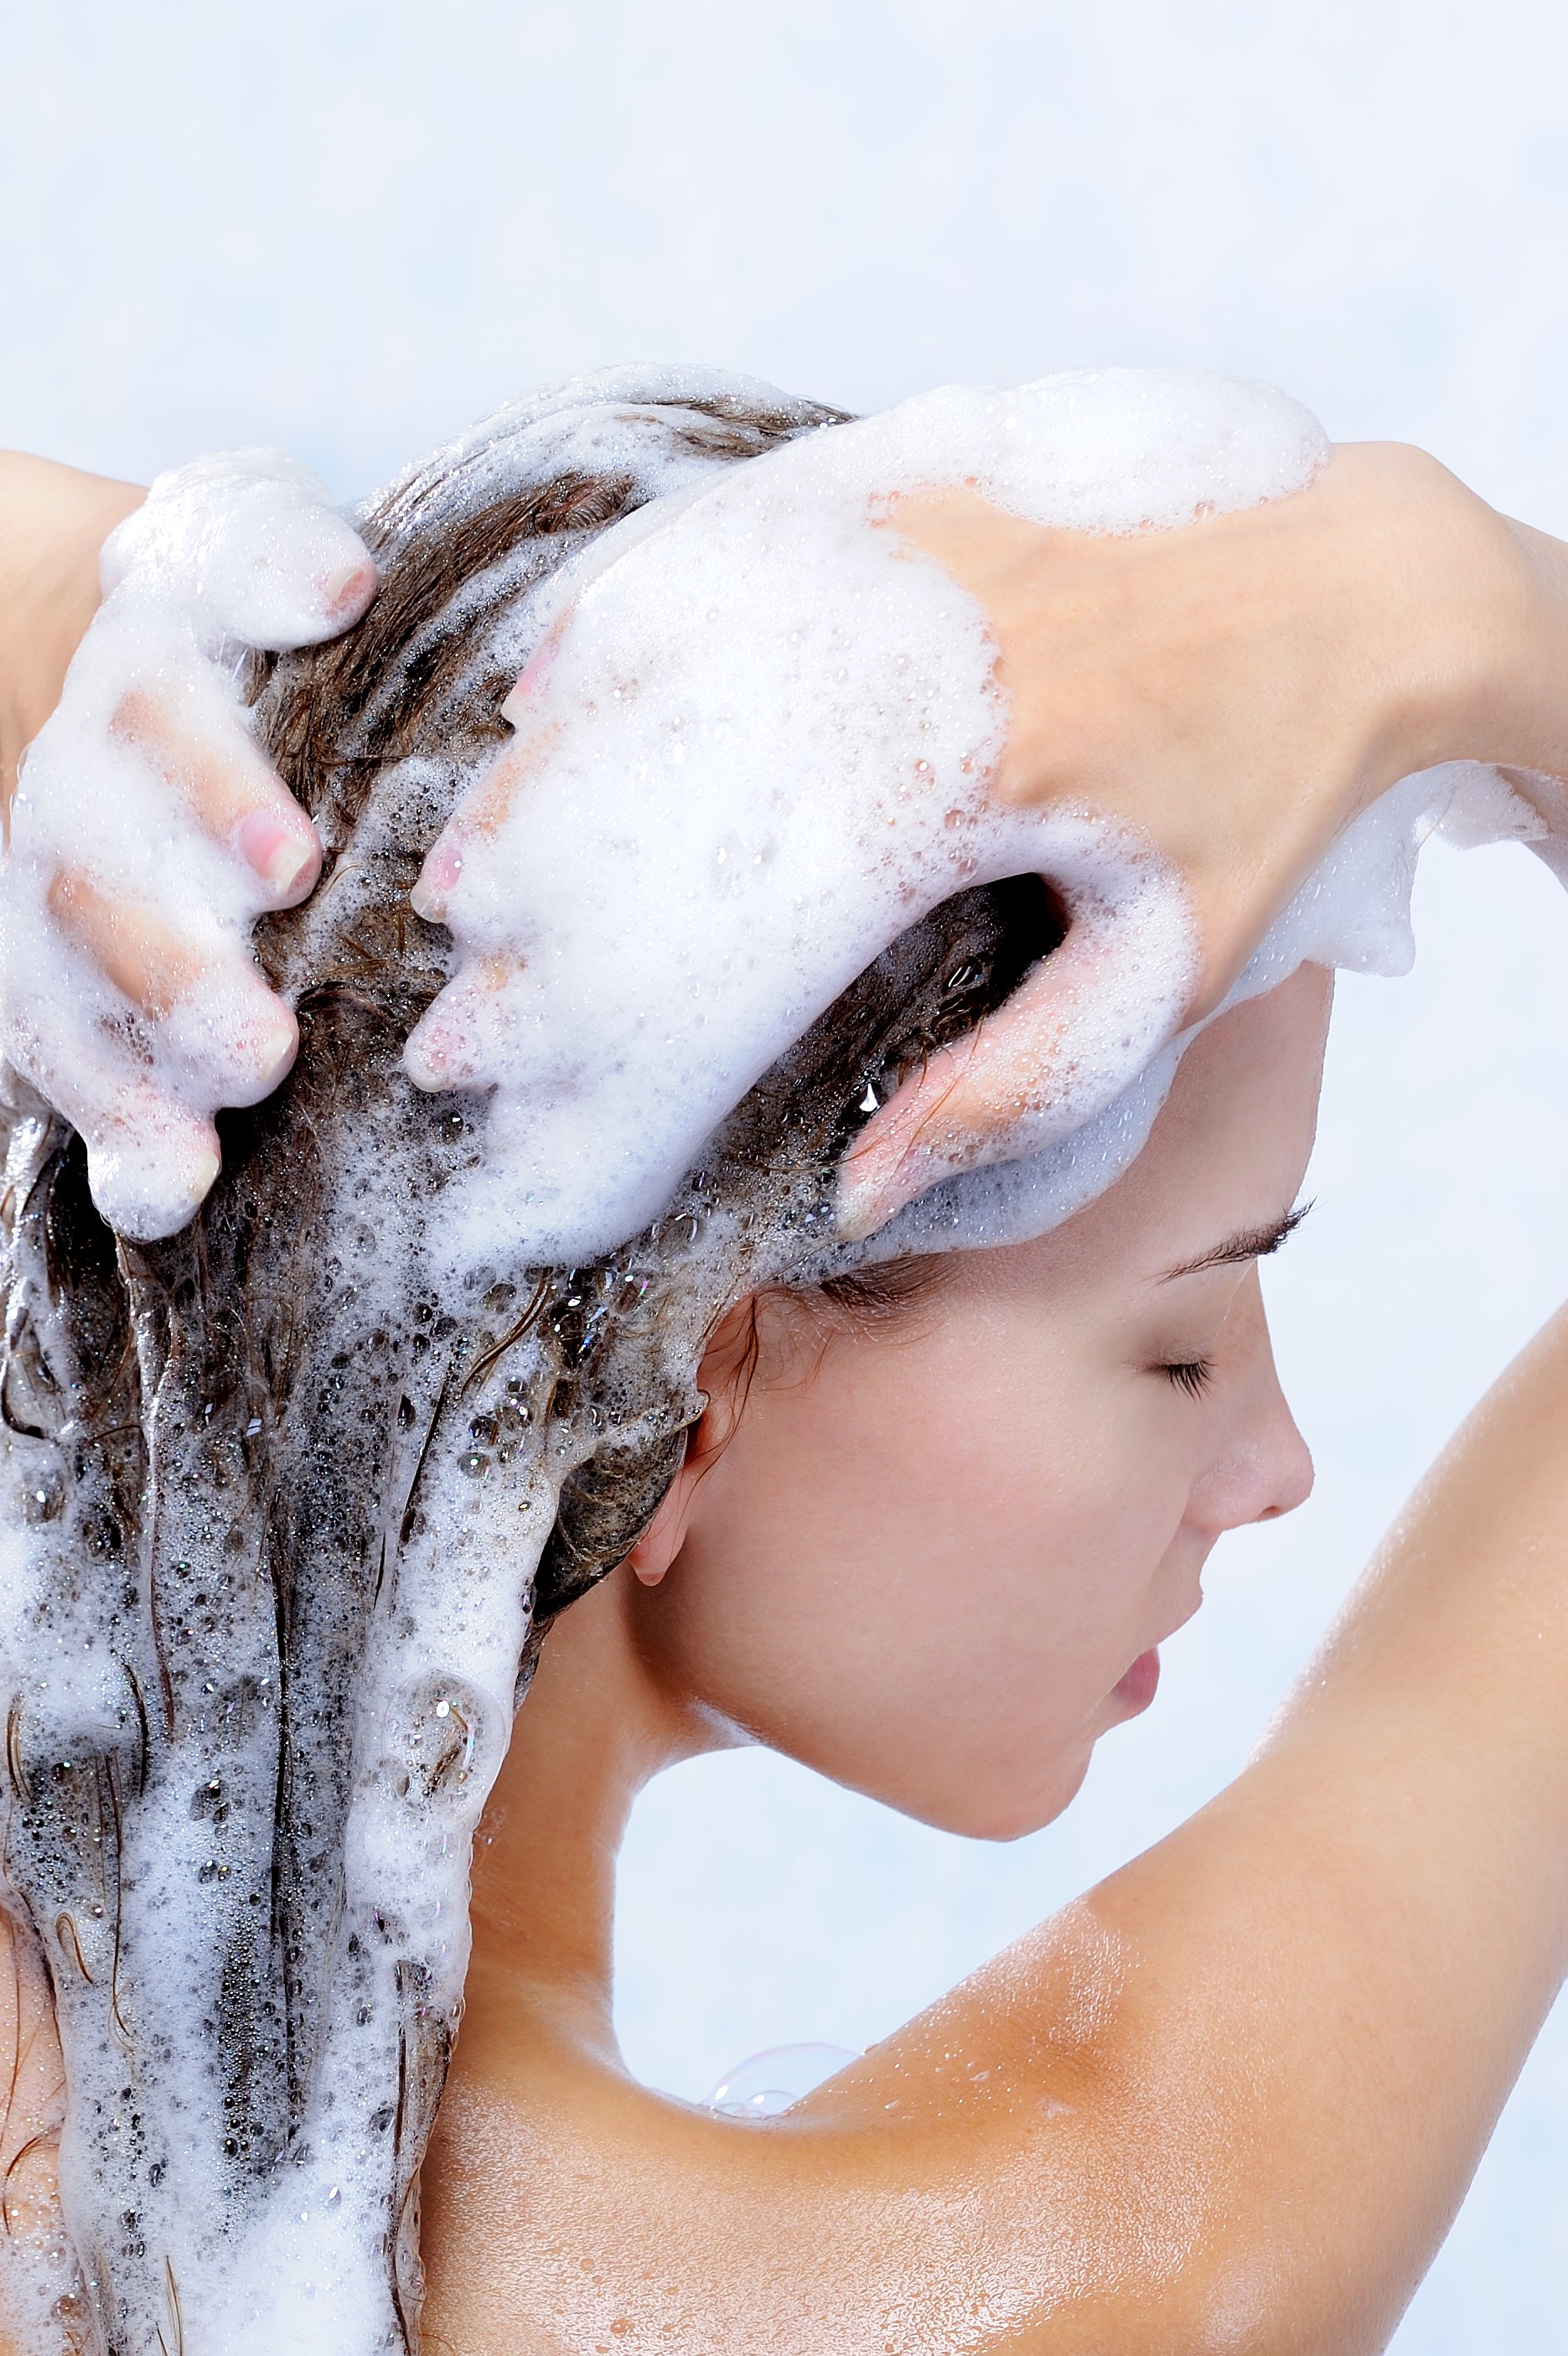 How Often Should You Wash Your Hair to Keep it Healthy